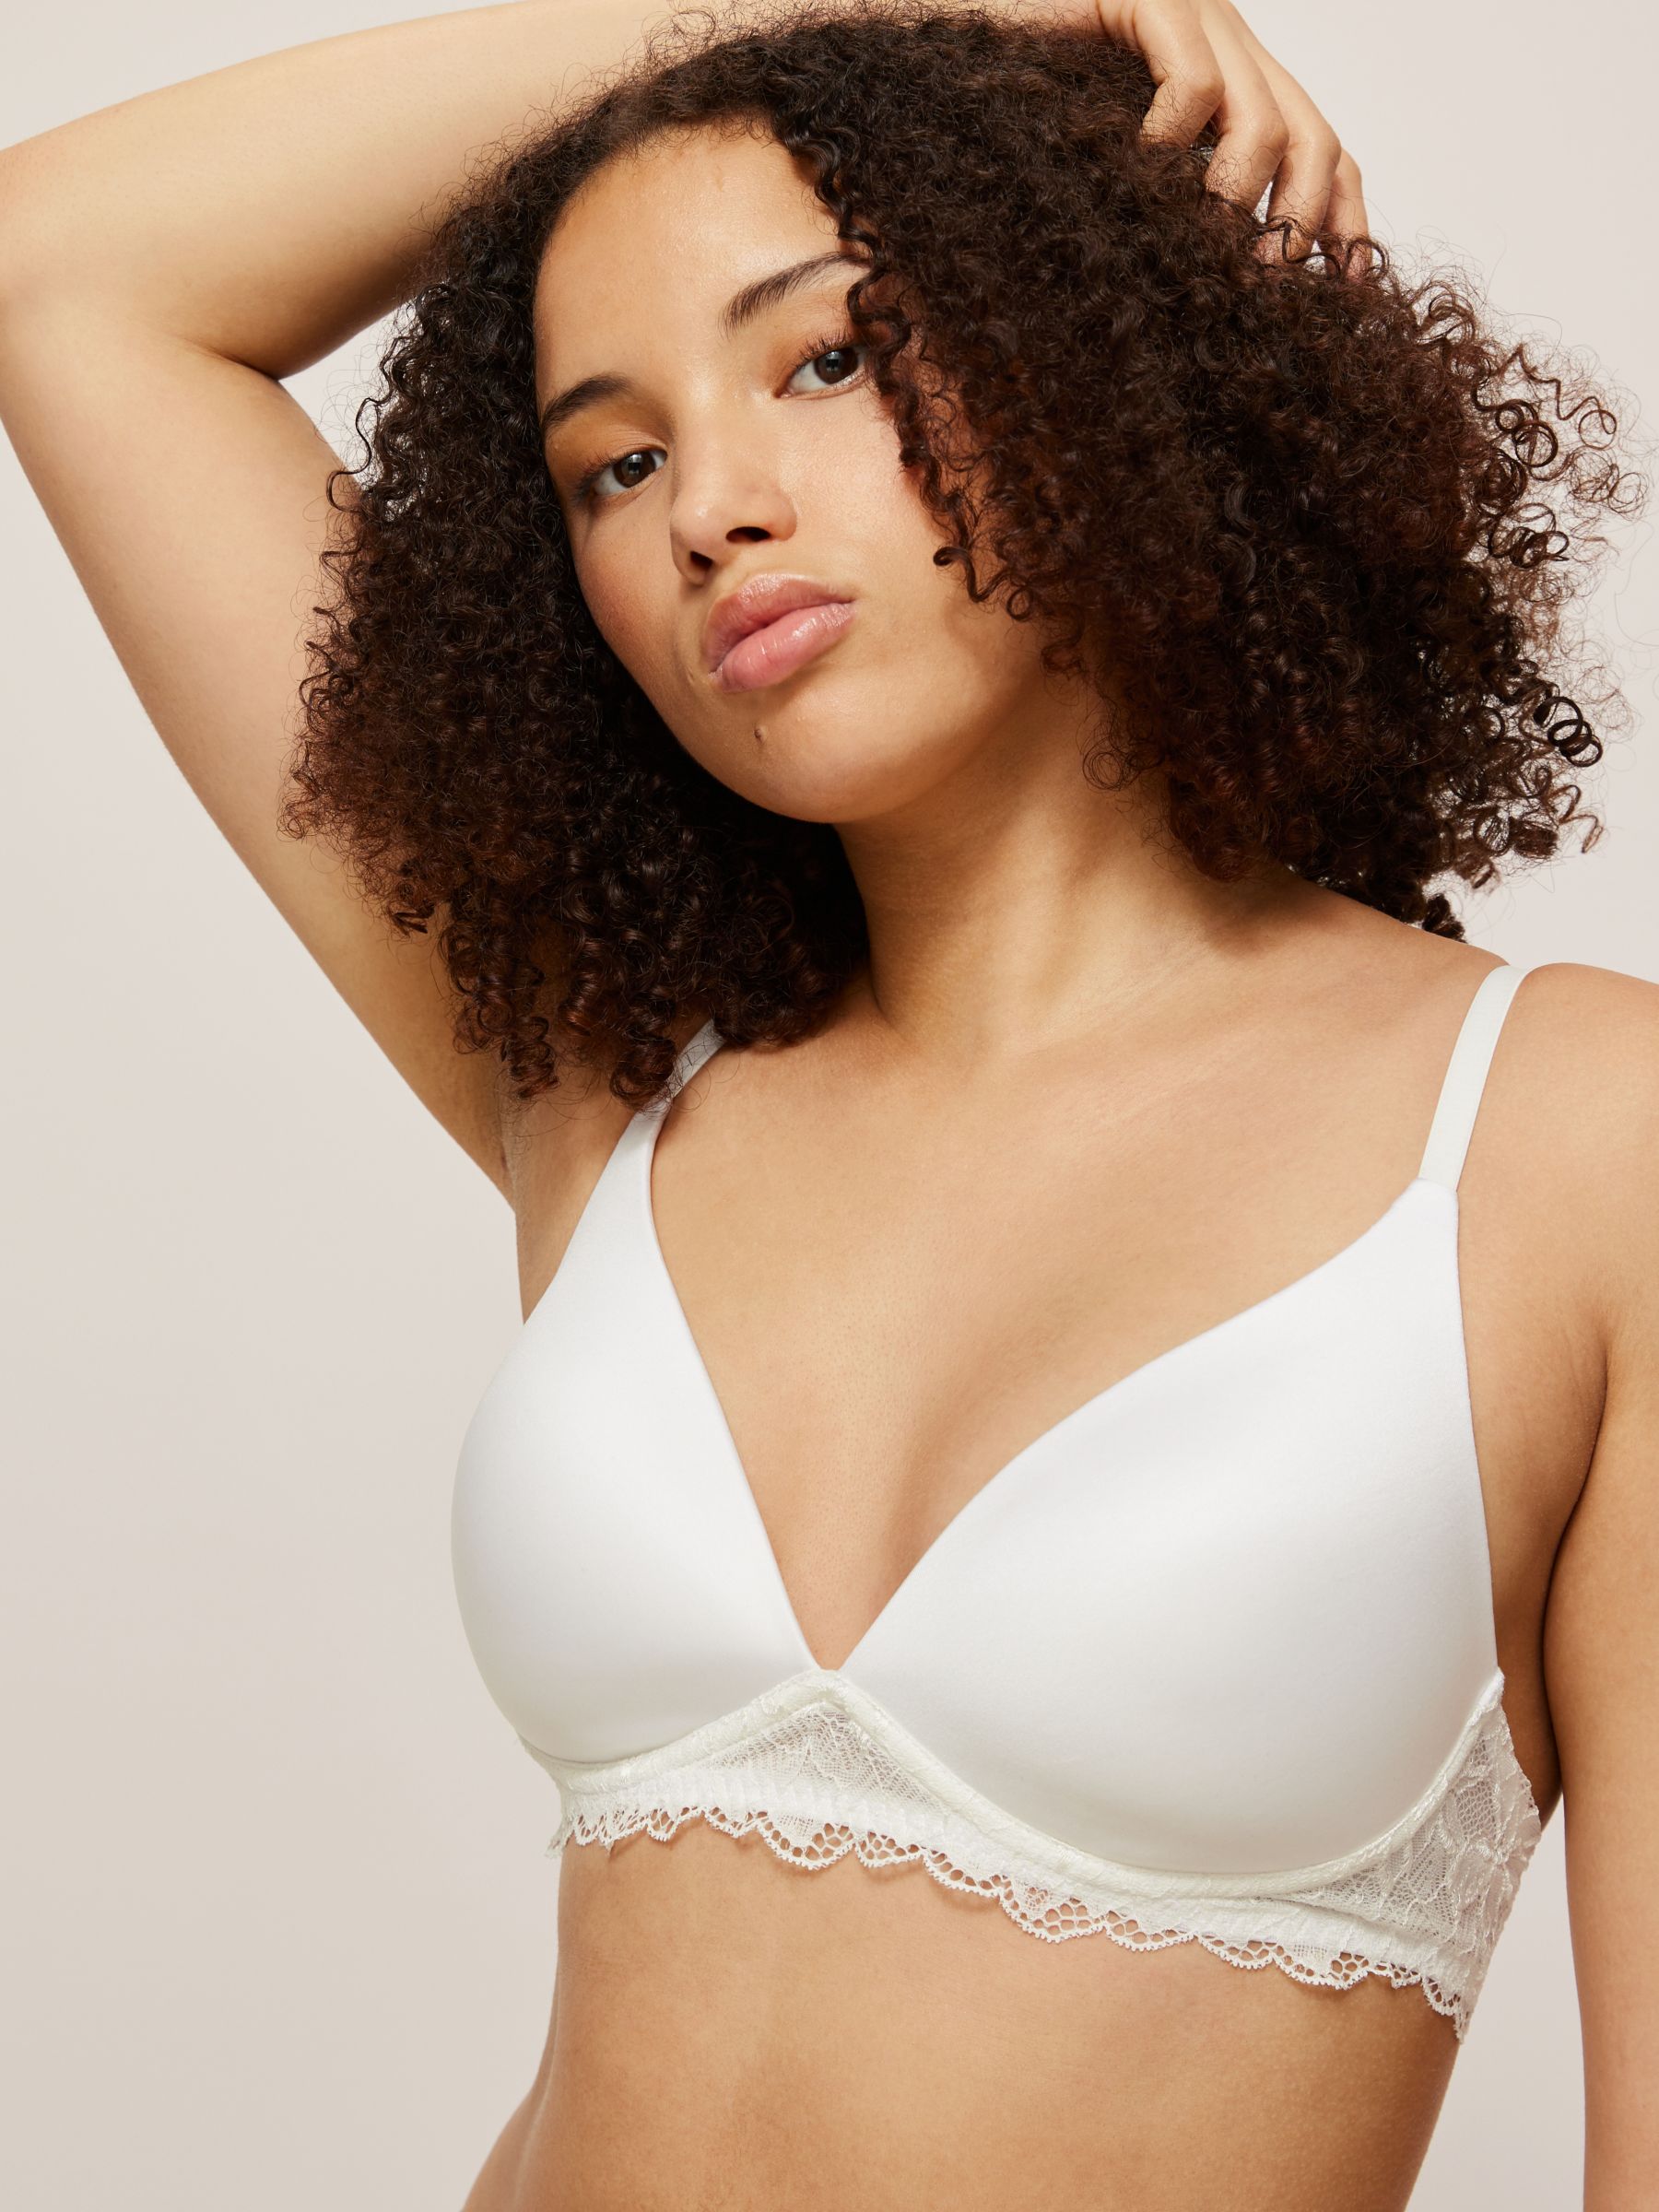 Buy John Lewis ANYDAY Willow Lace Detail Non-Wired Bra Online at johnlewis.com